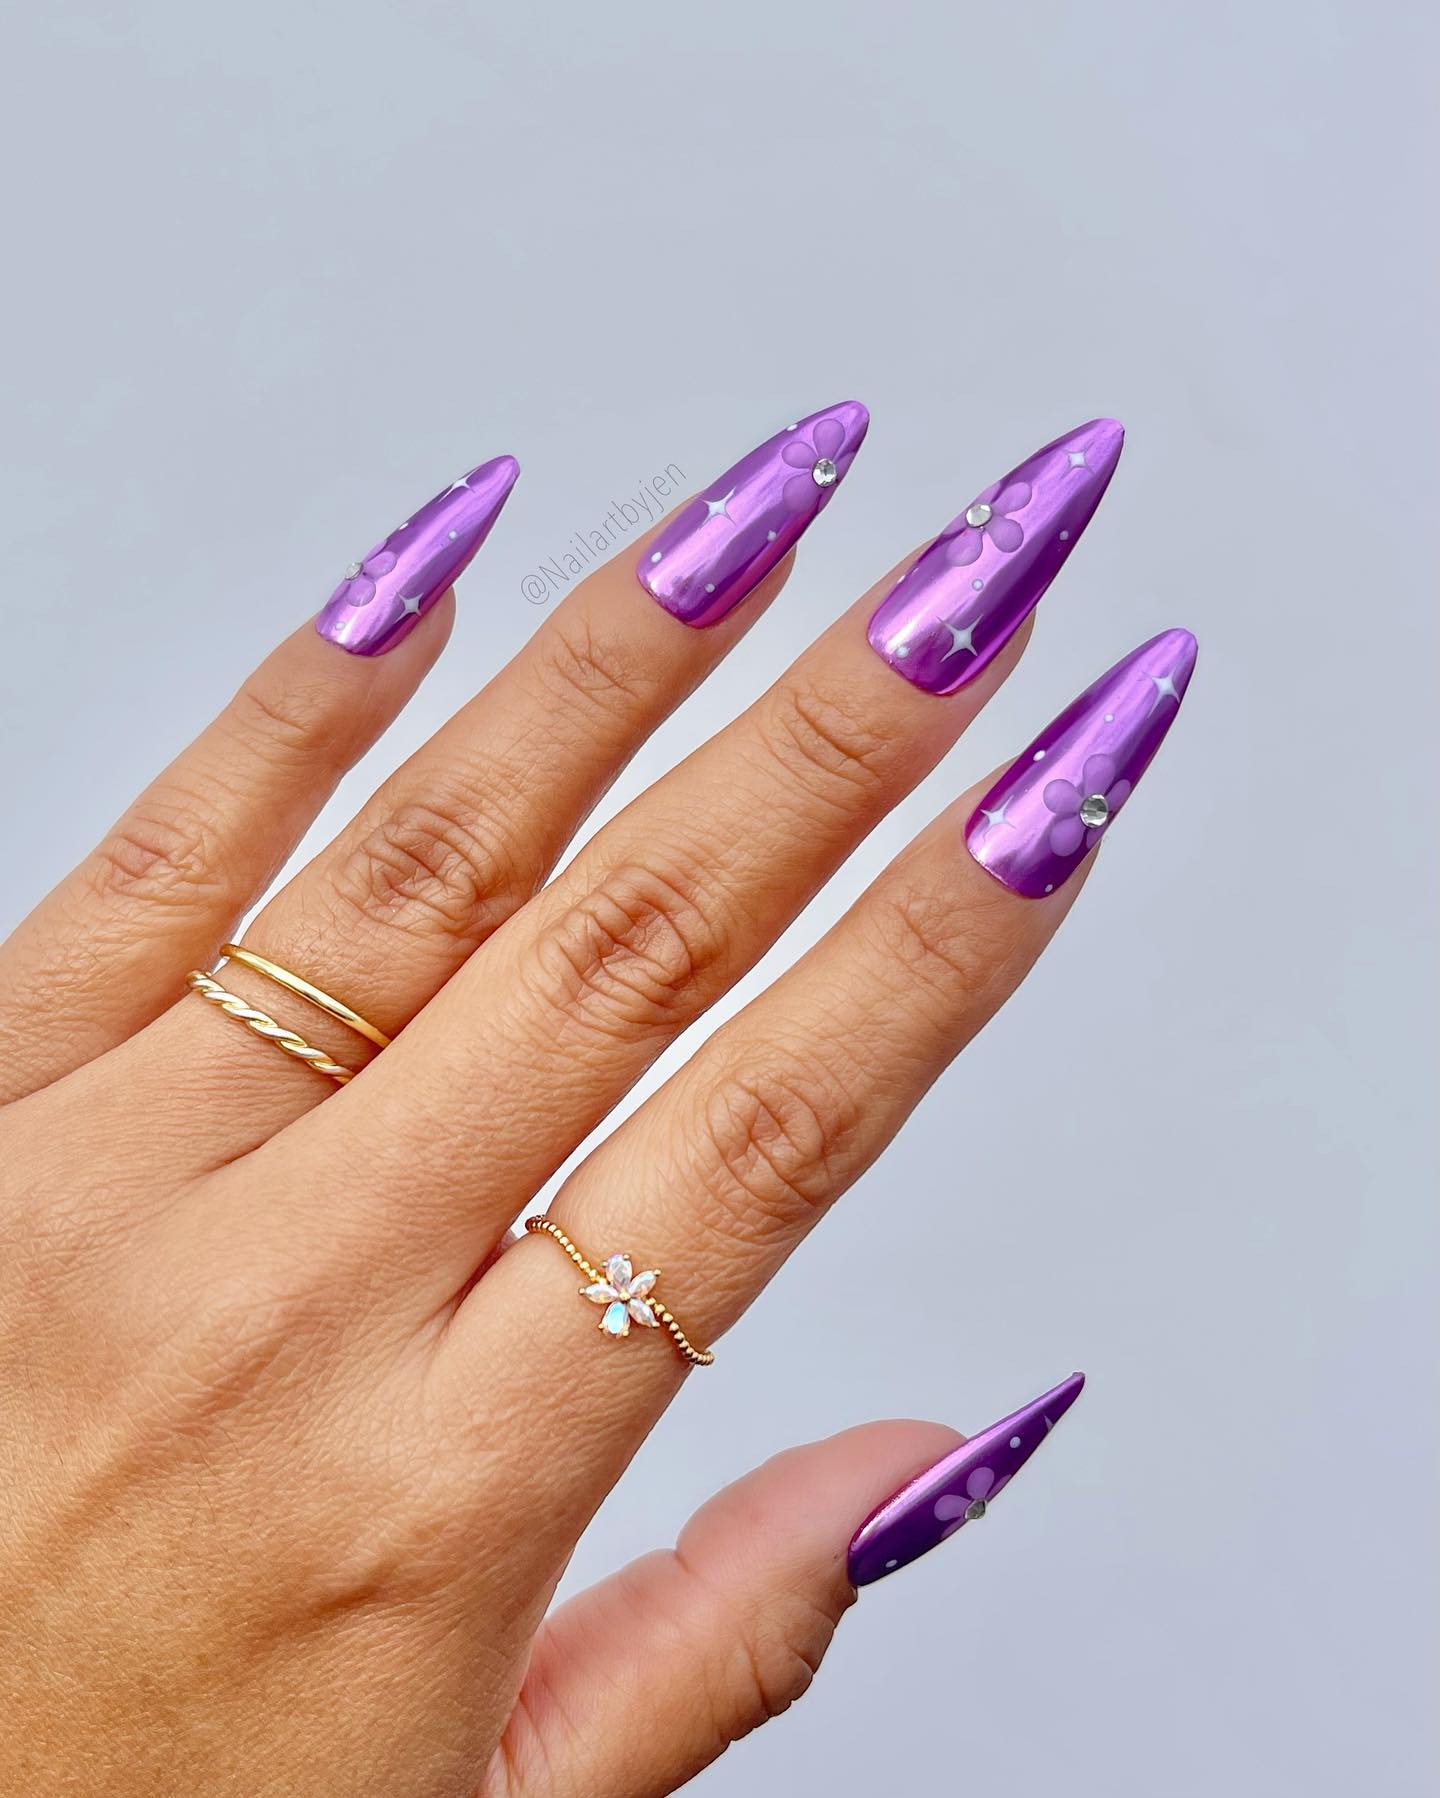 Long Purple Chrome Nails with Flower Design